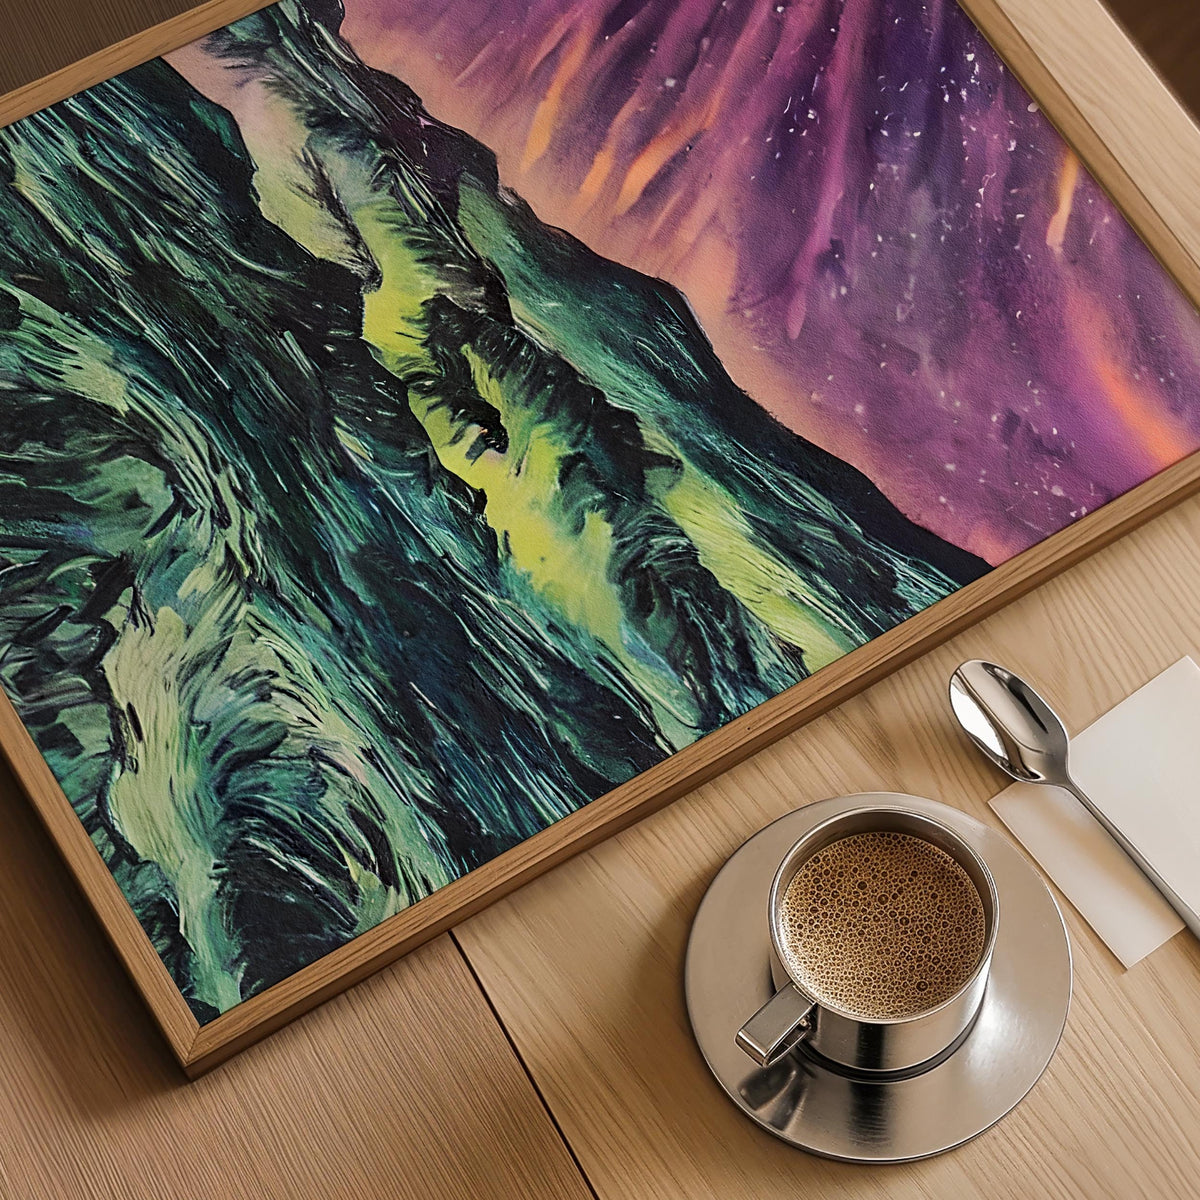 a cup of coffee next to a painting on a table